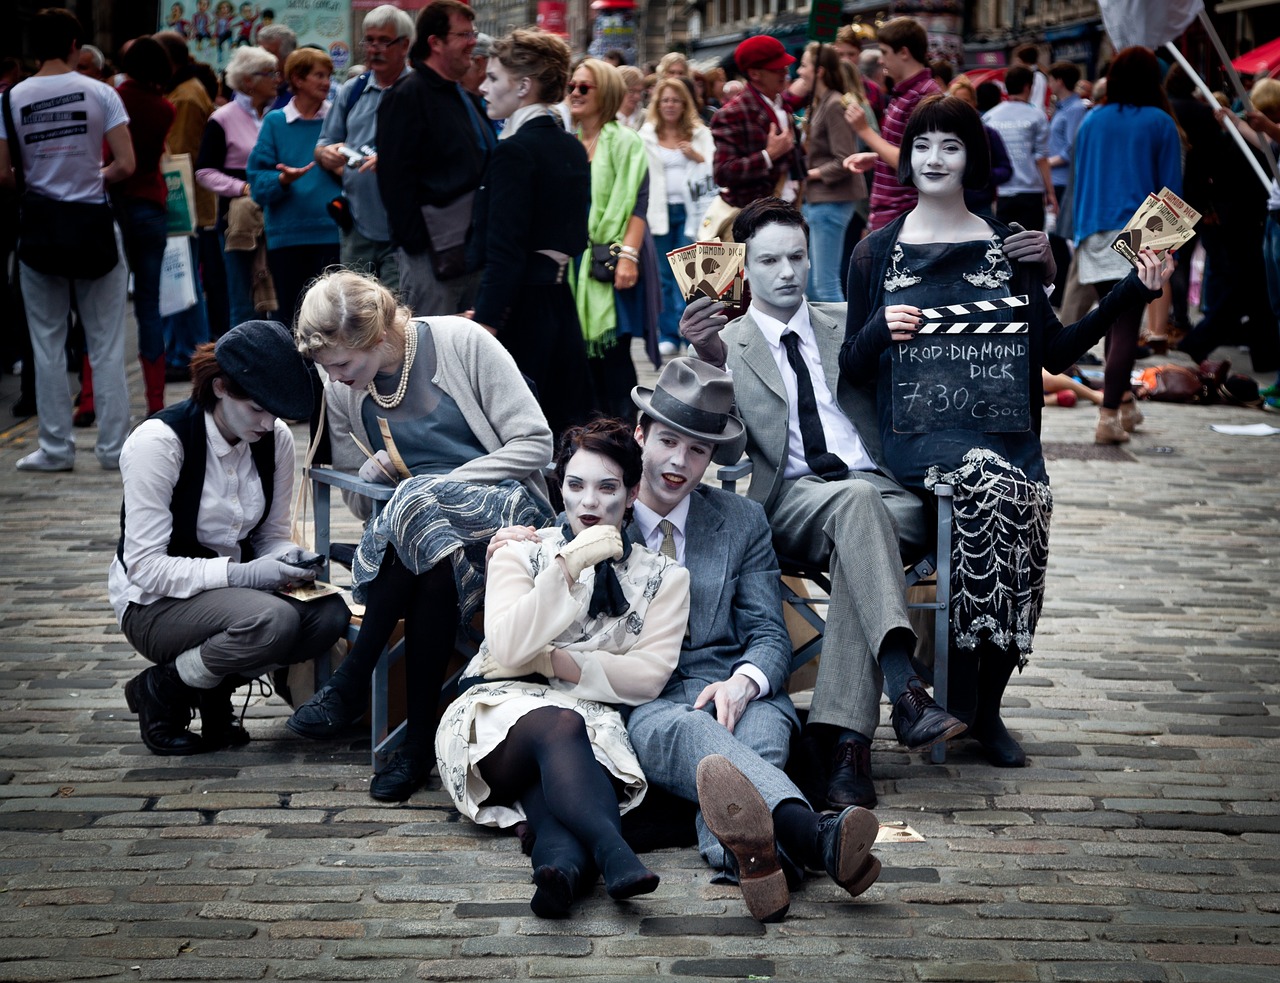 Six street performers wearing white mime makeup and clothes in various shades of black, white, and gray pose in a tableau. They are sitting in pairs and appearing to have conversations with each other. Behind them a large crowd of passers-by mills.